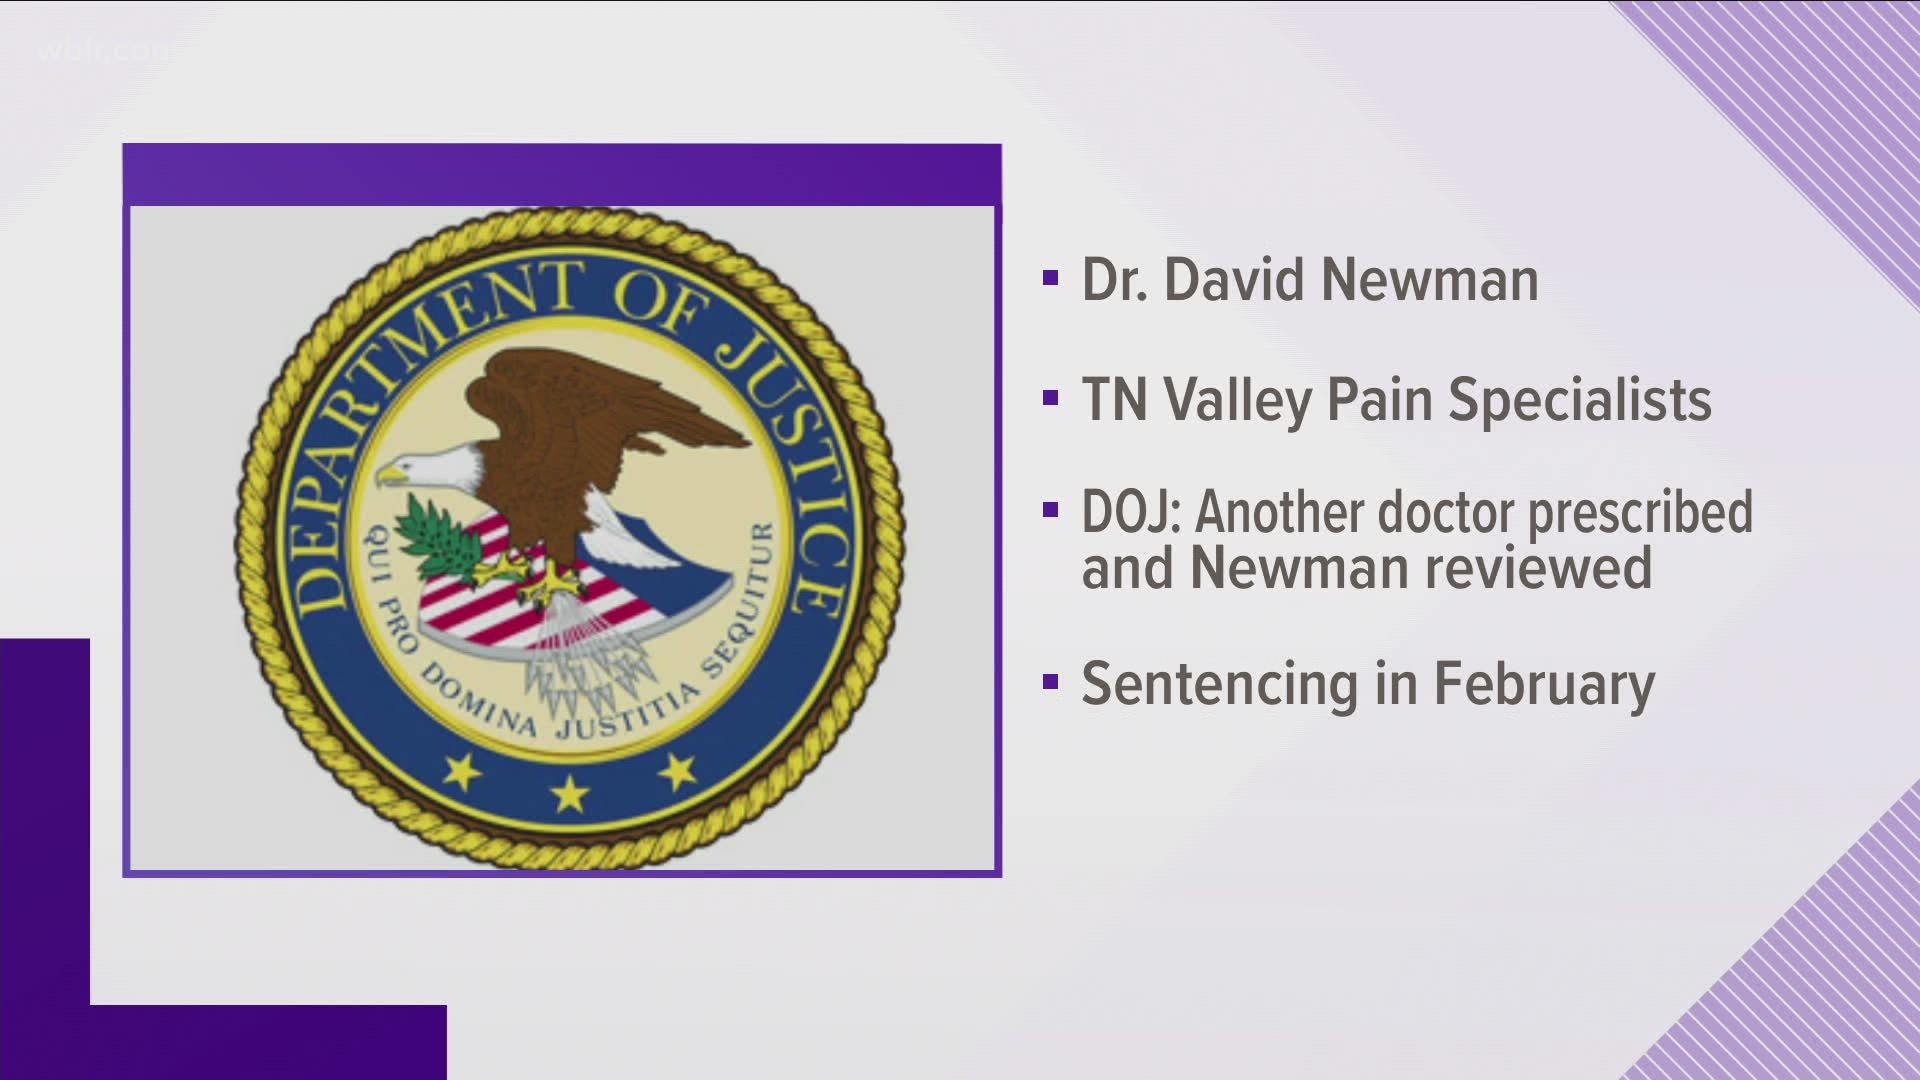 Dr. David Newman pleaded guilty in federal court to the illegal operation of a drug clinic.